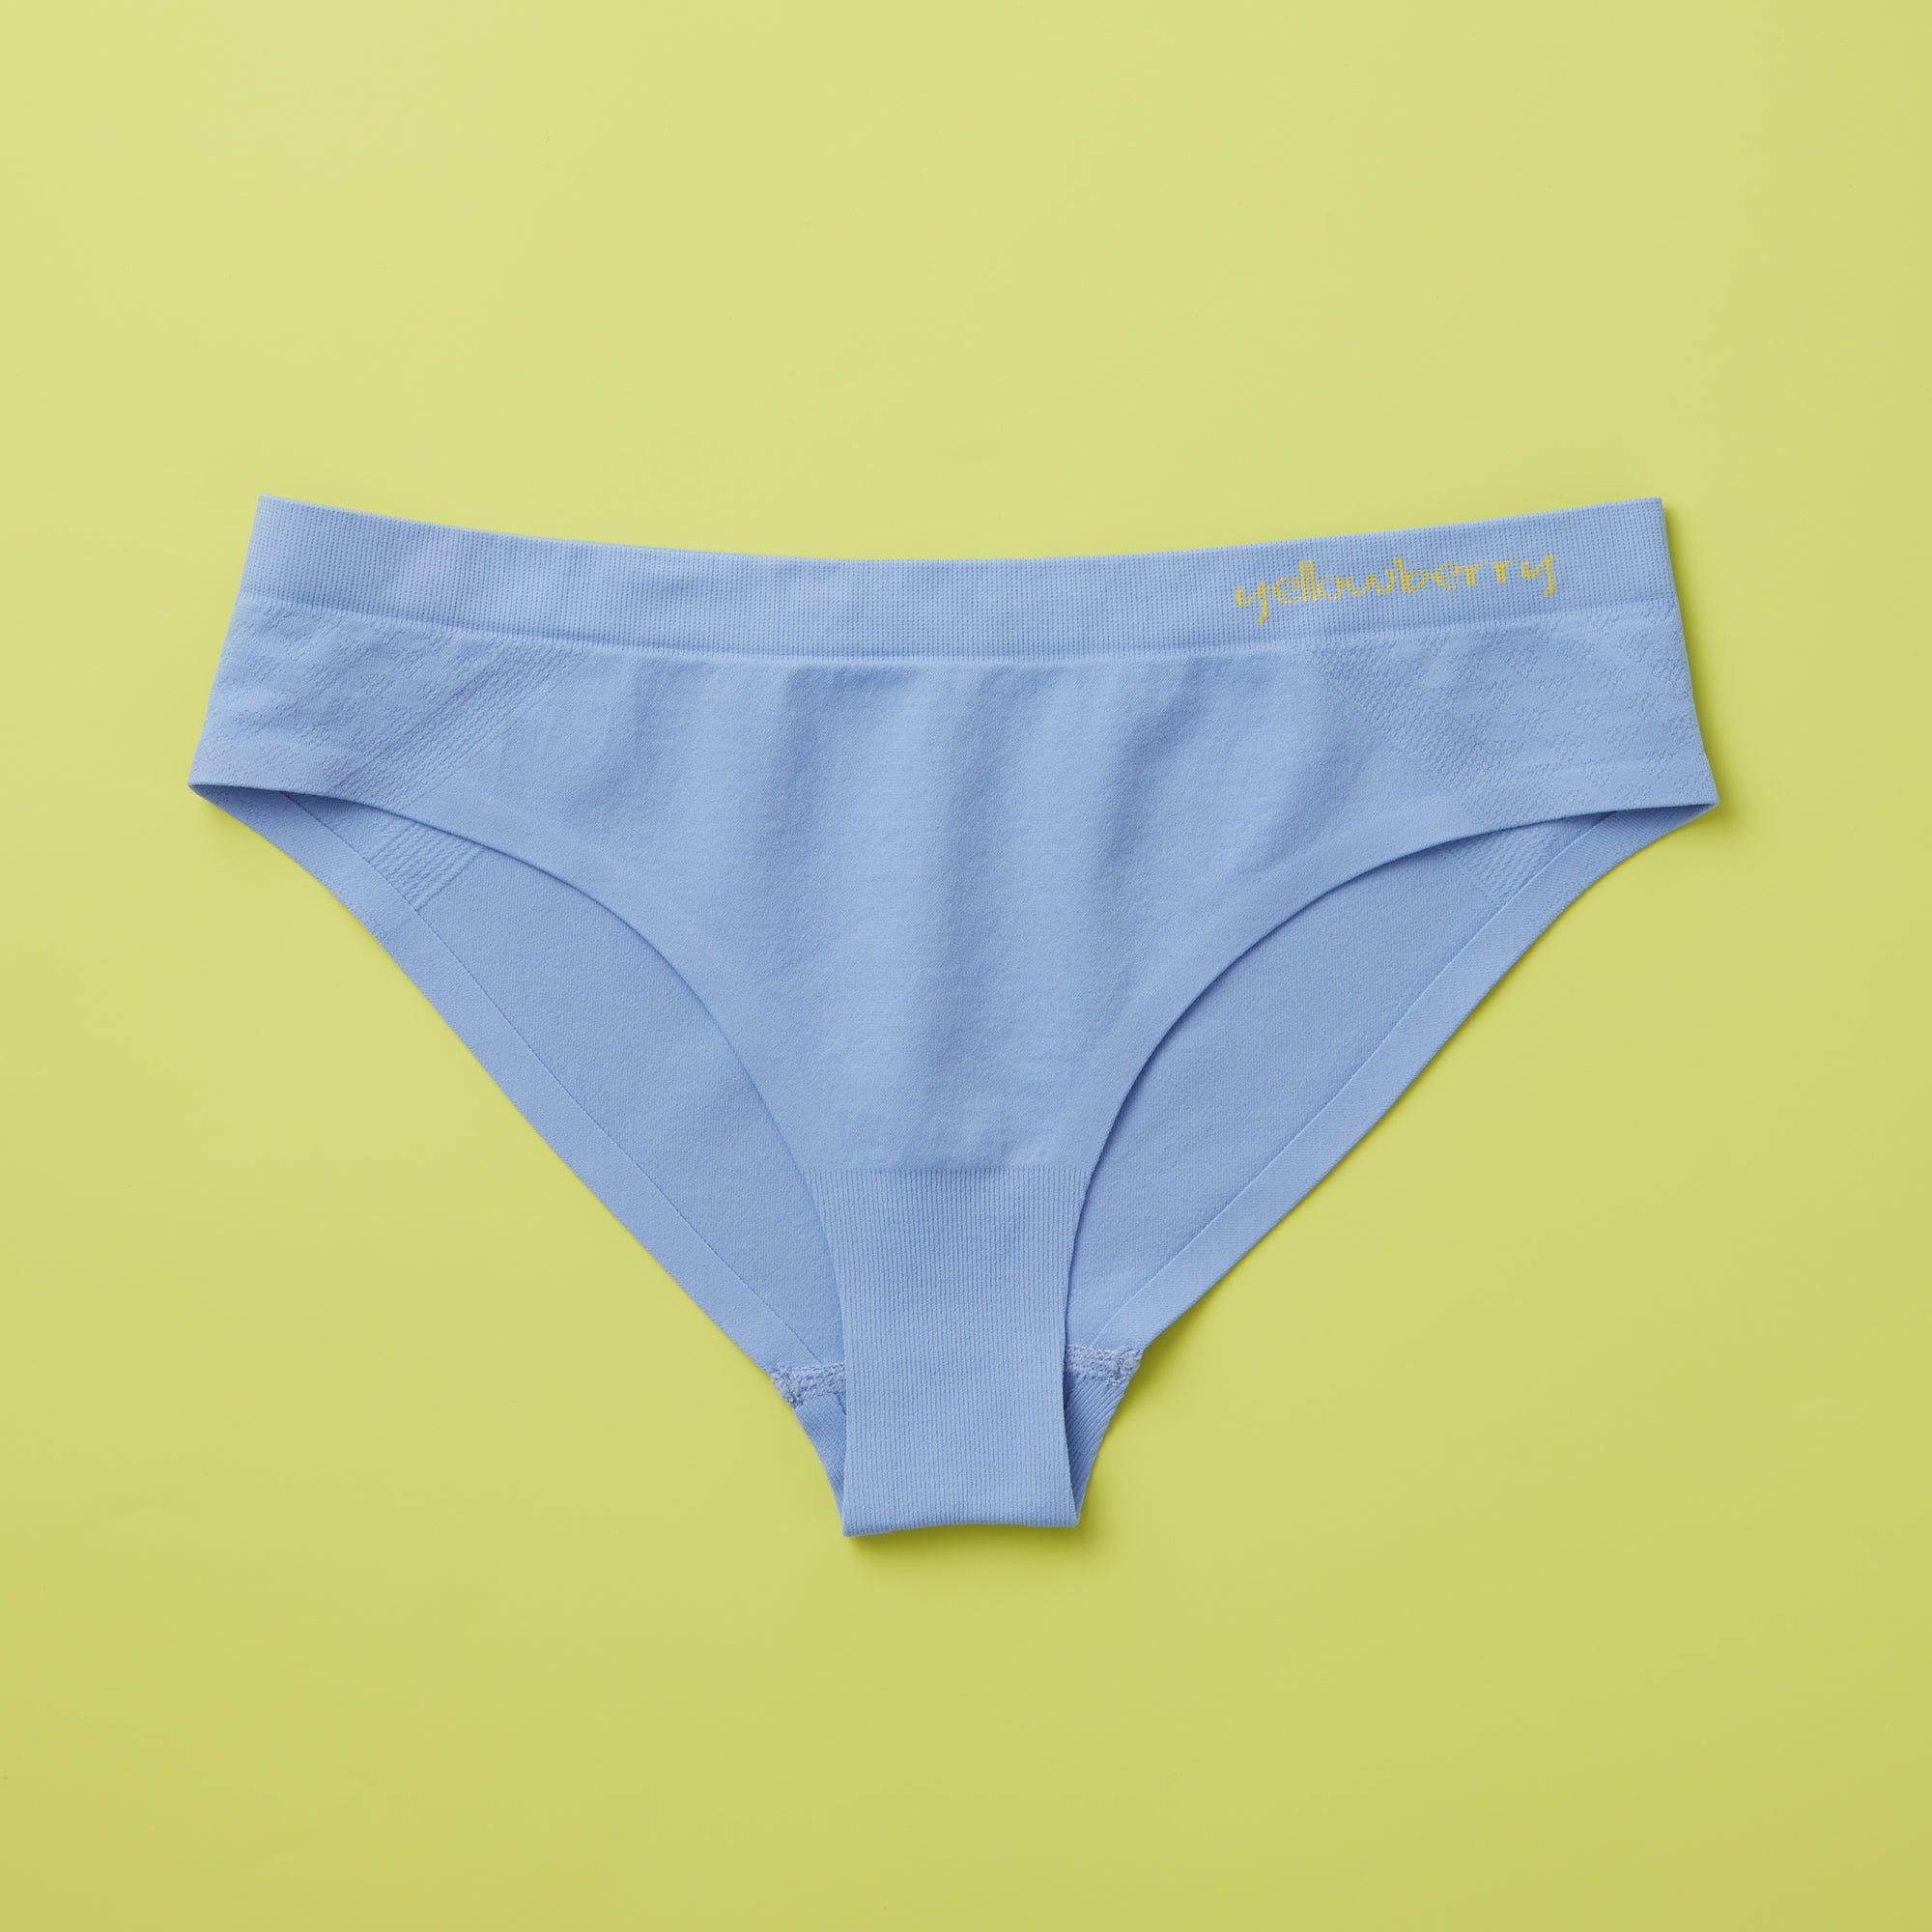 The Benefits of Seamless Underwear: Everything You Need to Know